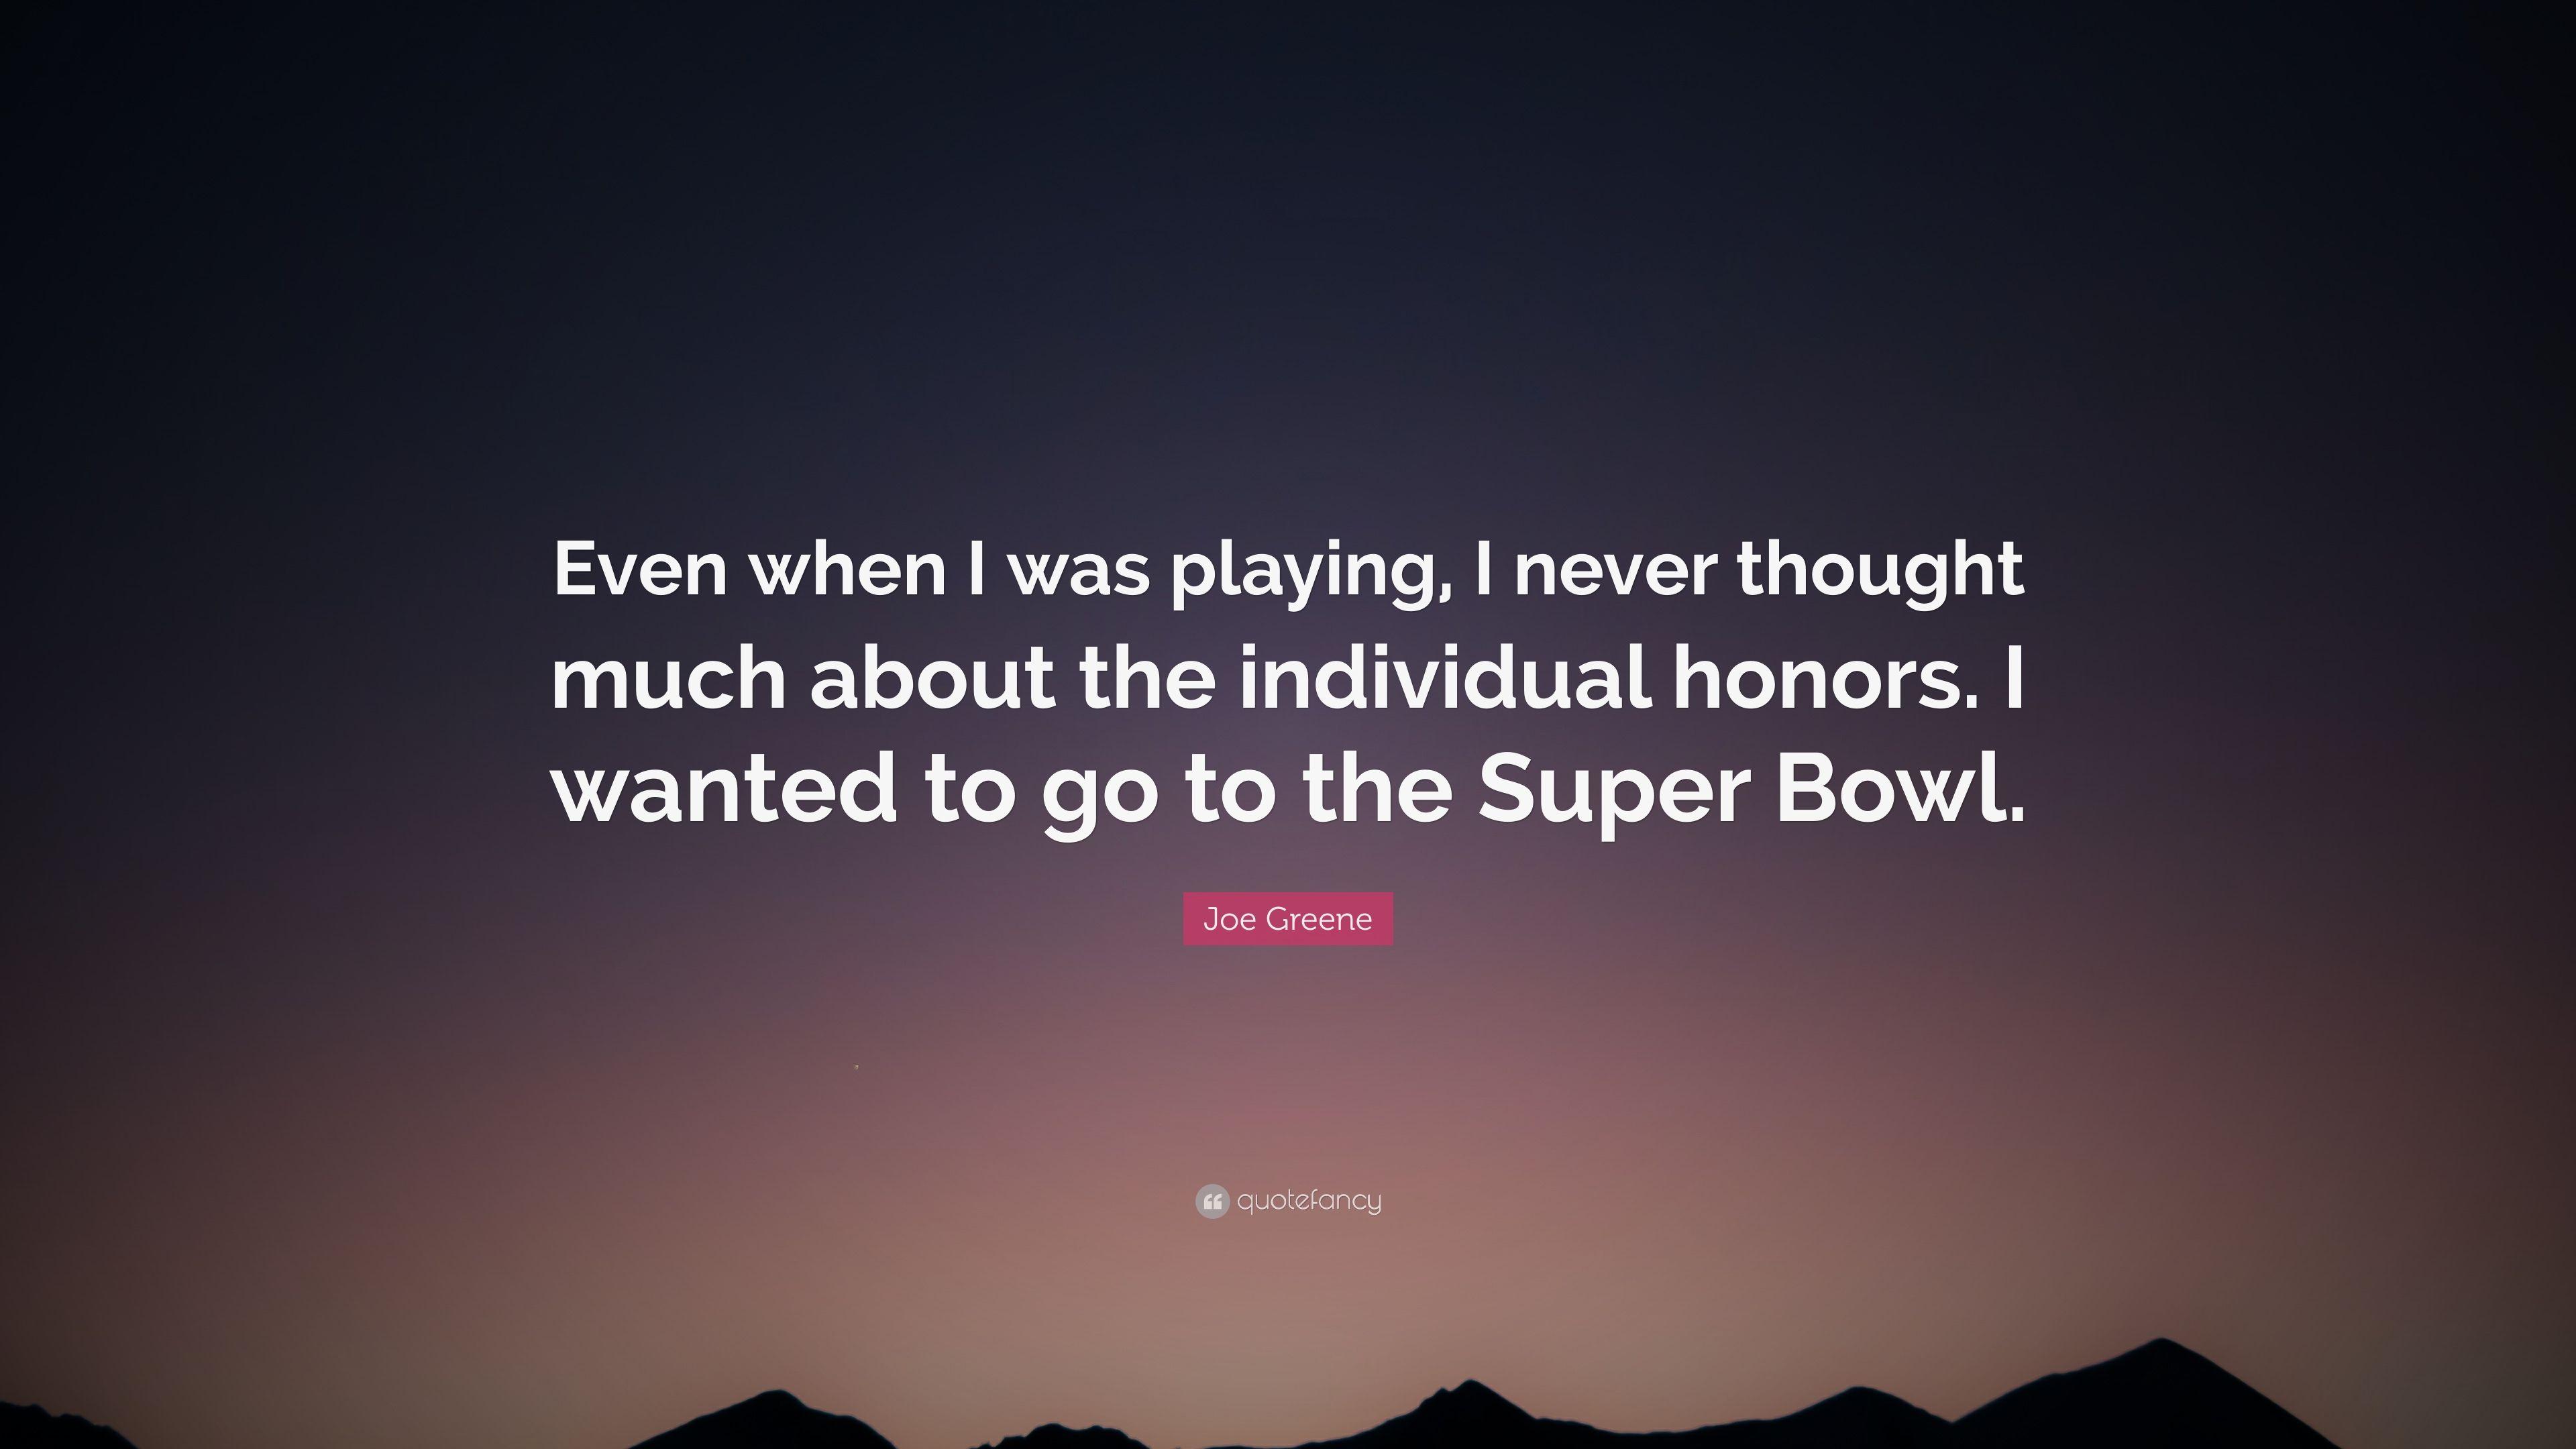 Joe Greene Quote: “Even when I was playing, I never thought much